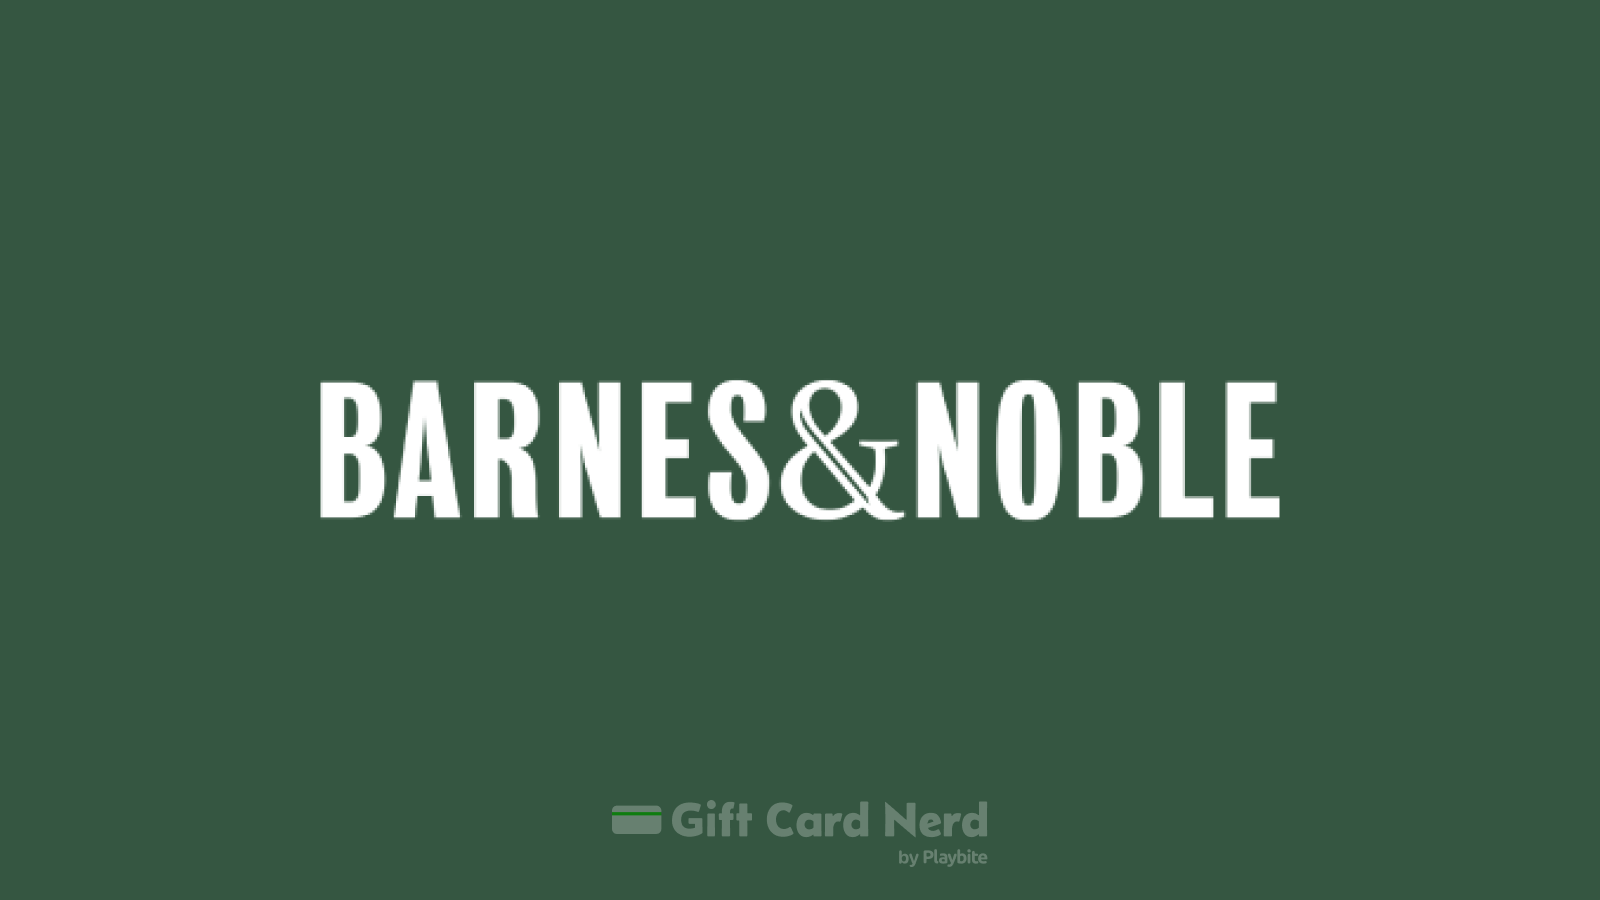 Can I Use a Barnes and Noble Gift Card on Postmates?